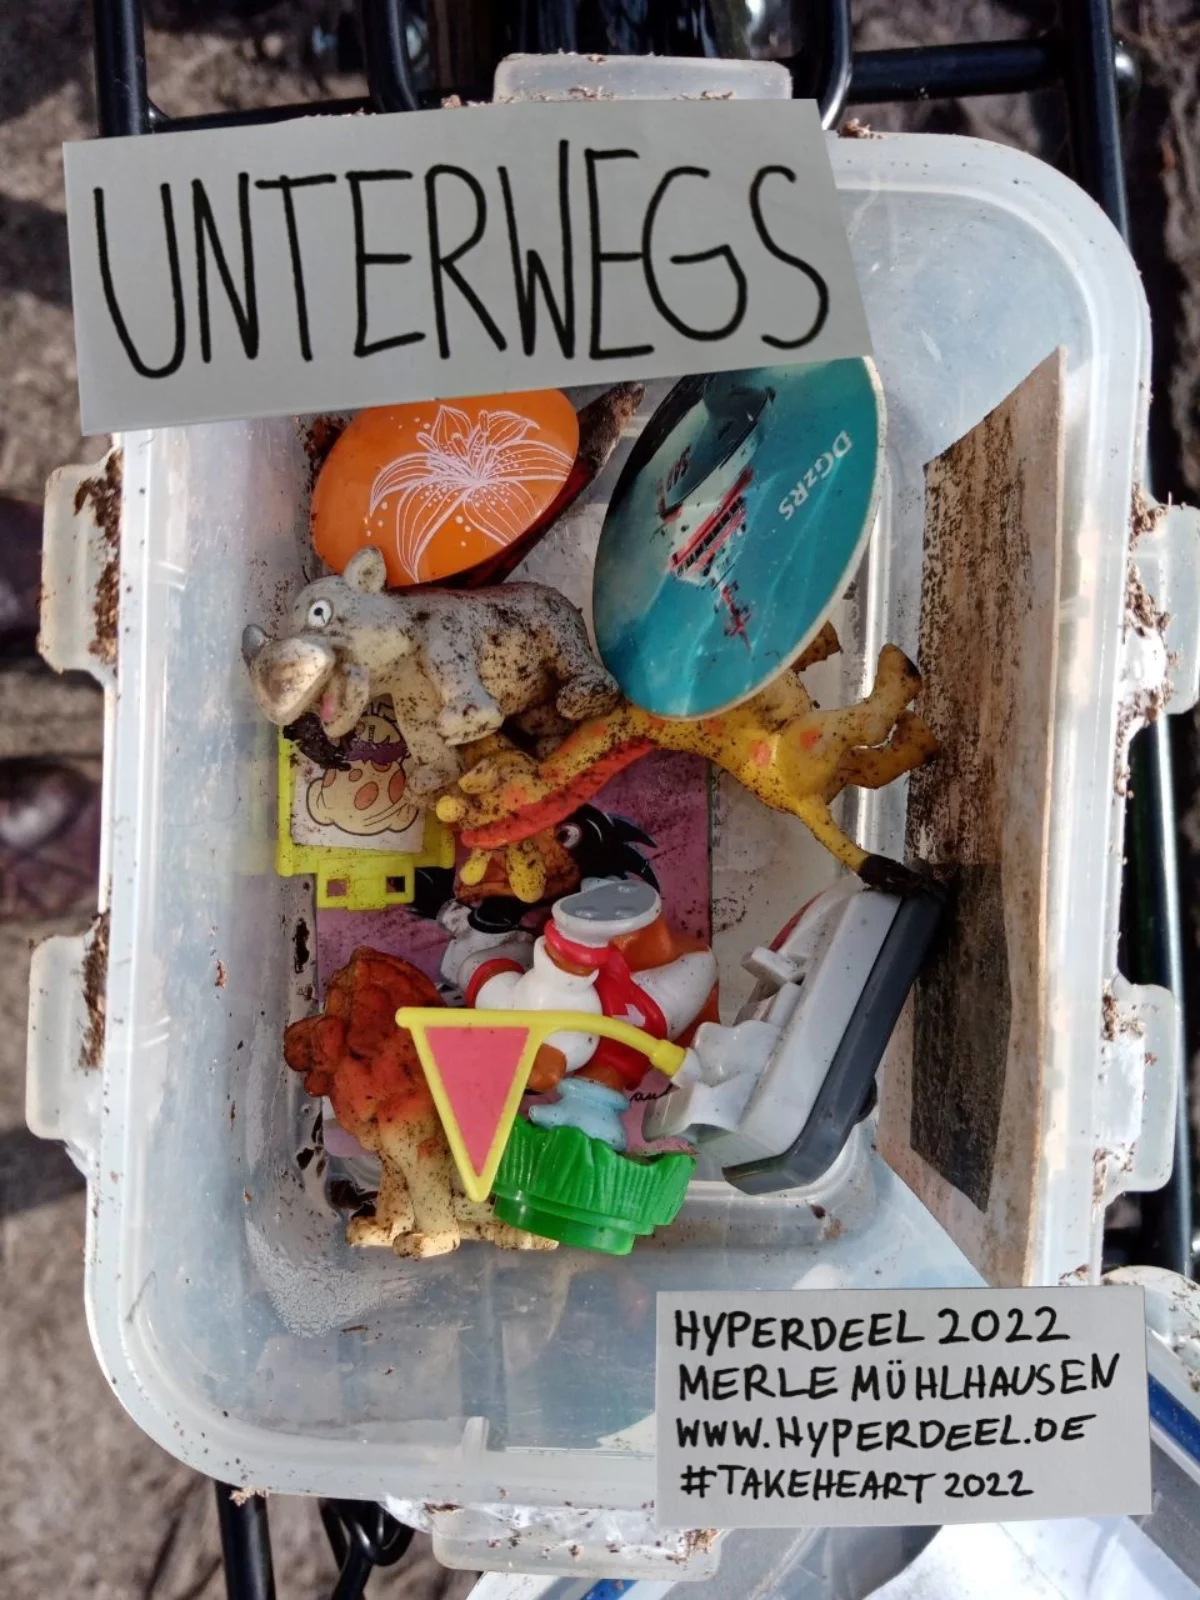 View into a plastic box in which there are old, sandy toy figures. At the bos are two signs on one says: On the road. The other says: Hyperdeel 2022, Merle Mühlhausen, www.hyperdeel.de, #TakeHeart 2022.